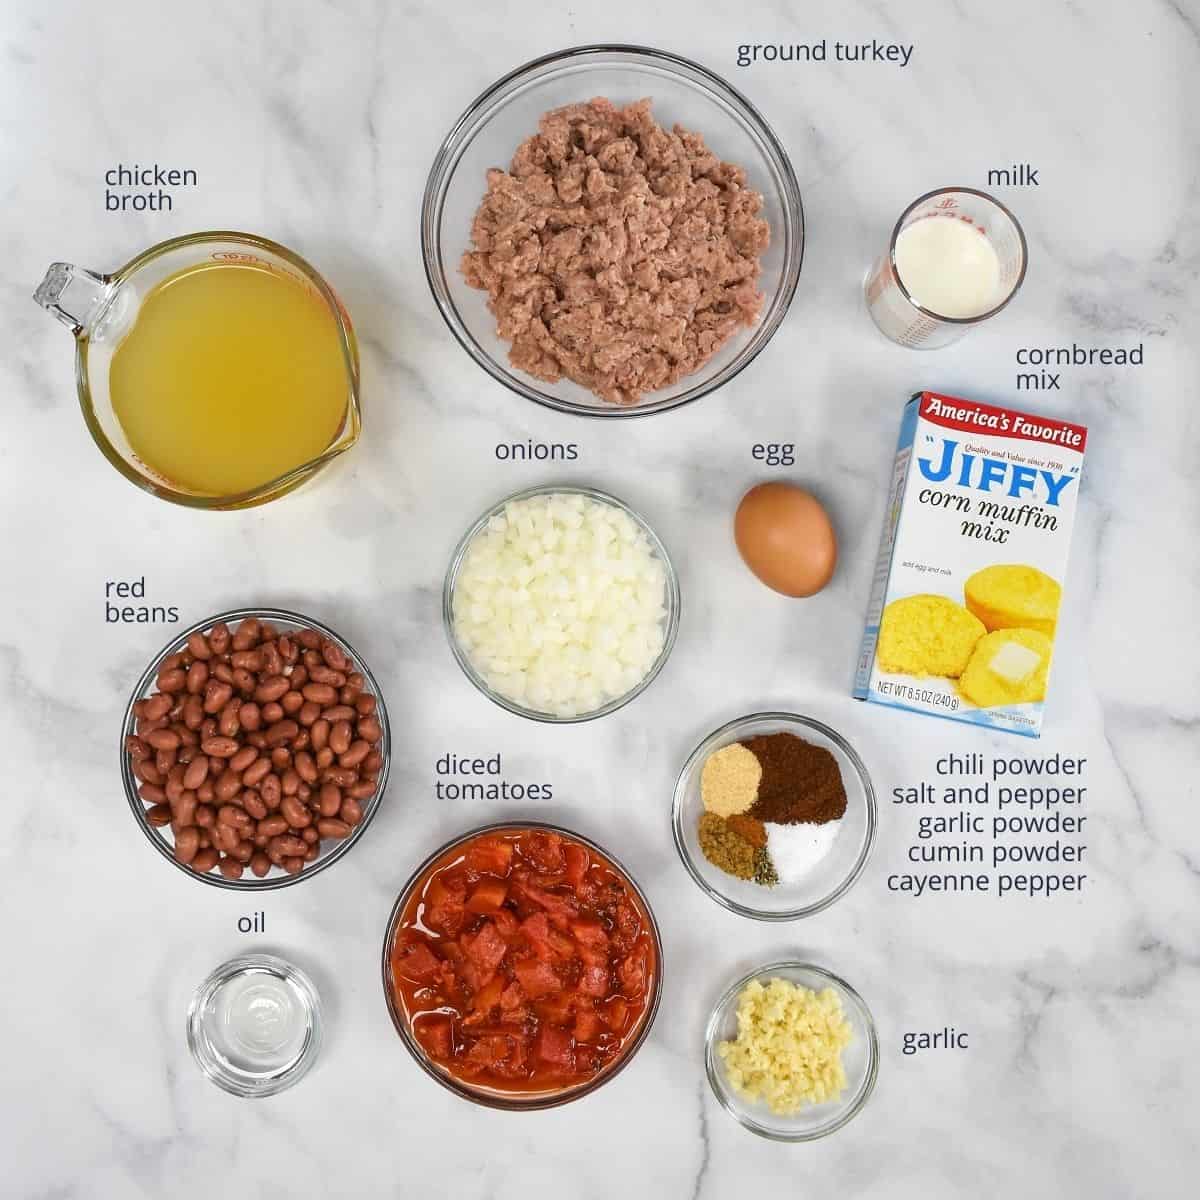 The prepped ingredients for the casserole in glass bowls (except the cornbread mix is in its box) arranged on a white table. Each ingredient is labeled on the top or side with the name.